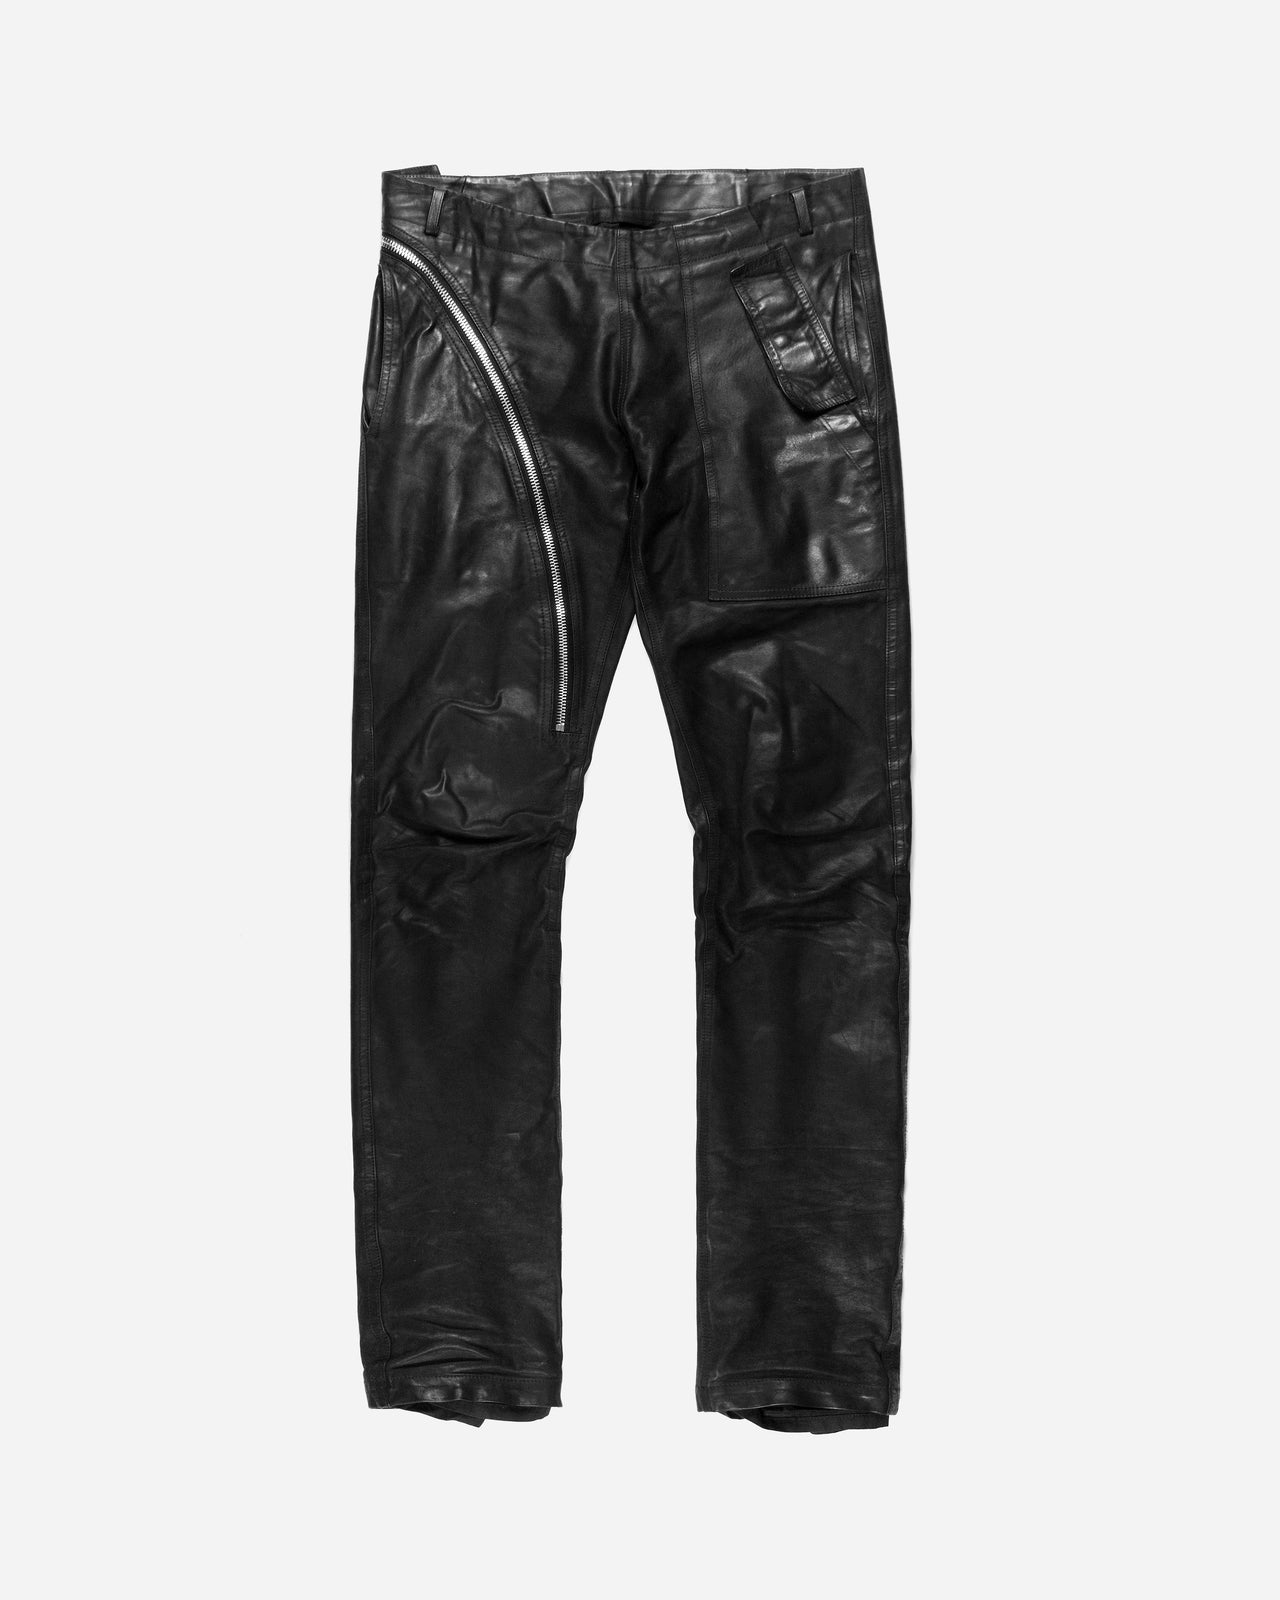 Rick Owens Leather Aircut Jeans - SS15 “Faun”